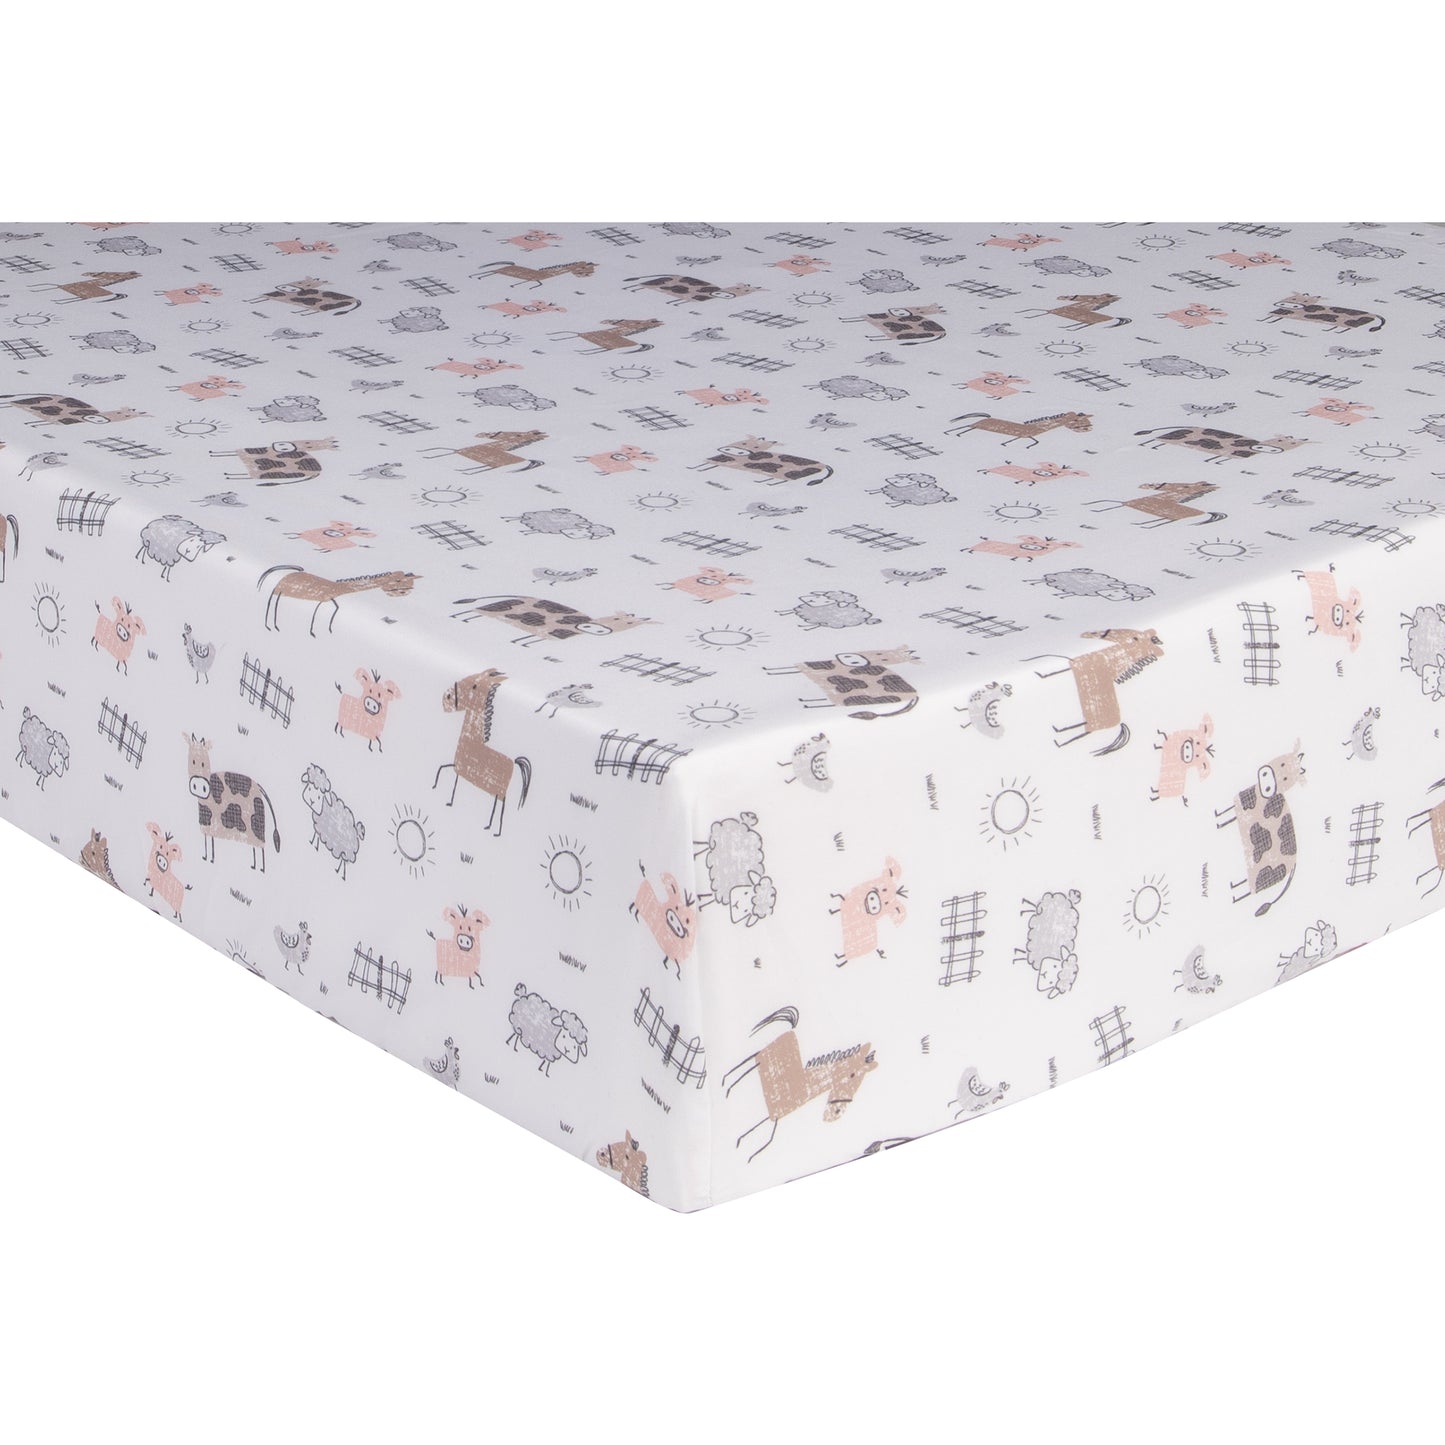 Cottage Farm Crib Sheet; features farm animals in a pasture in gray, brown and a rosy pink color pallette